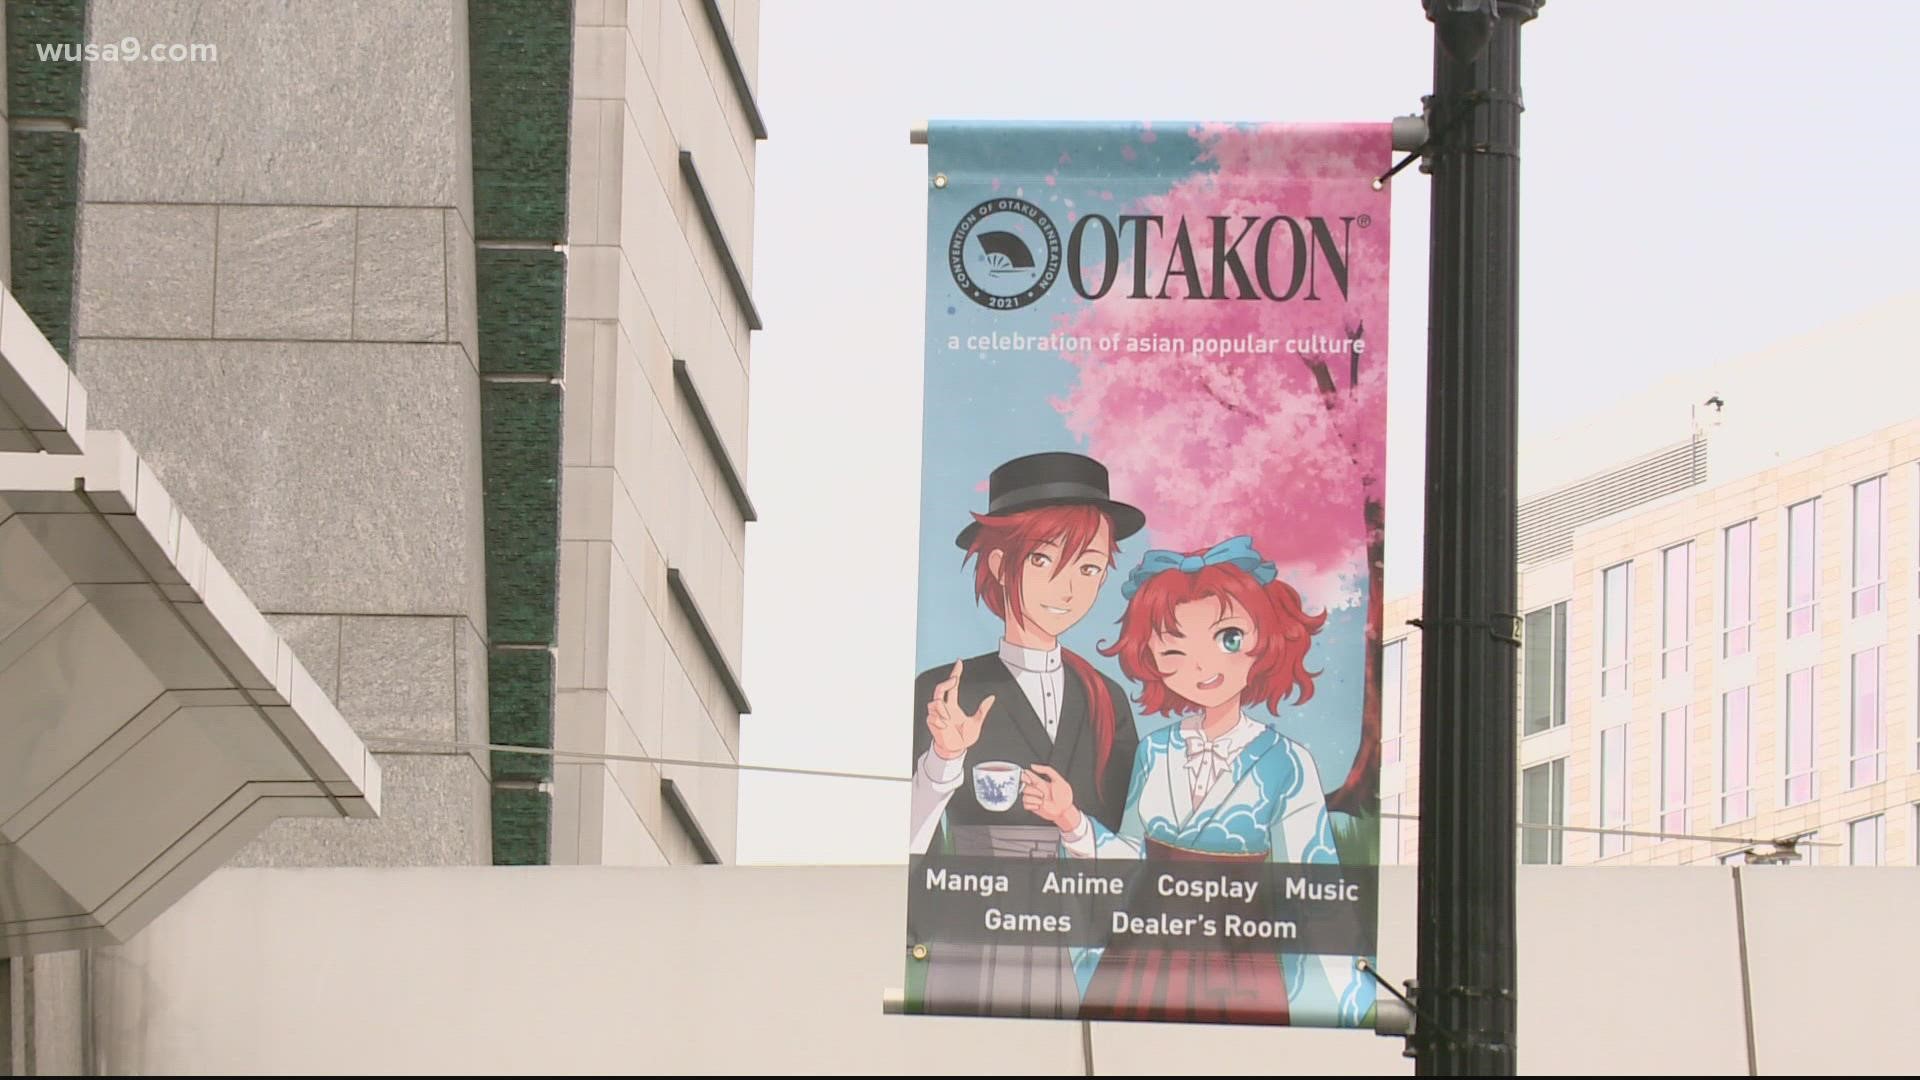 Otakon, which draws large attendance, will be missed when it moves -  Baltimore Business Journal